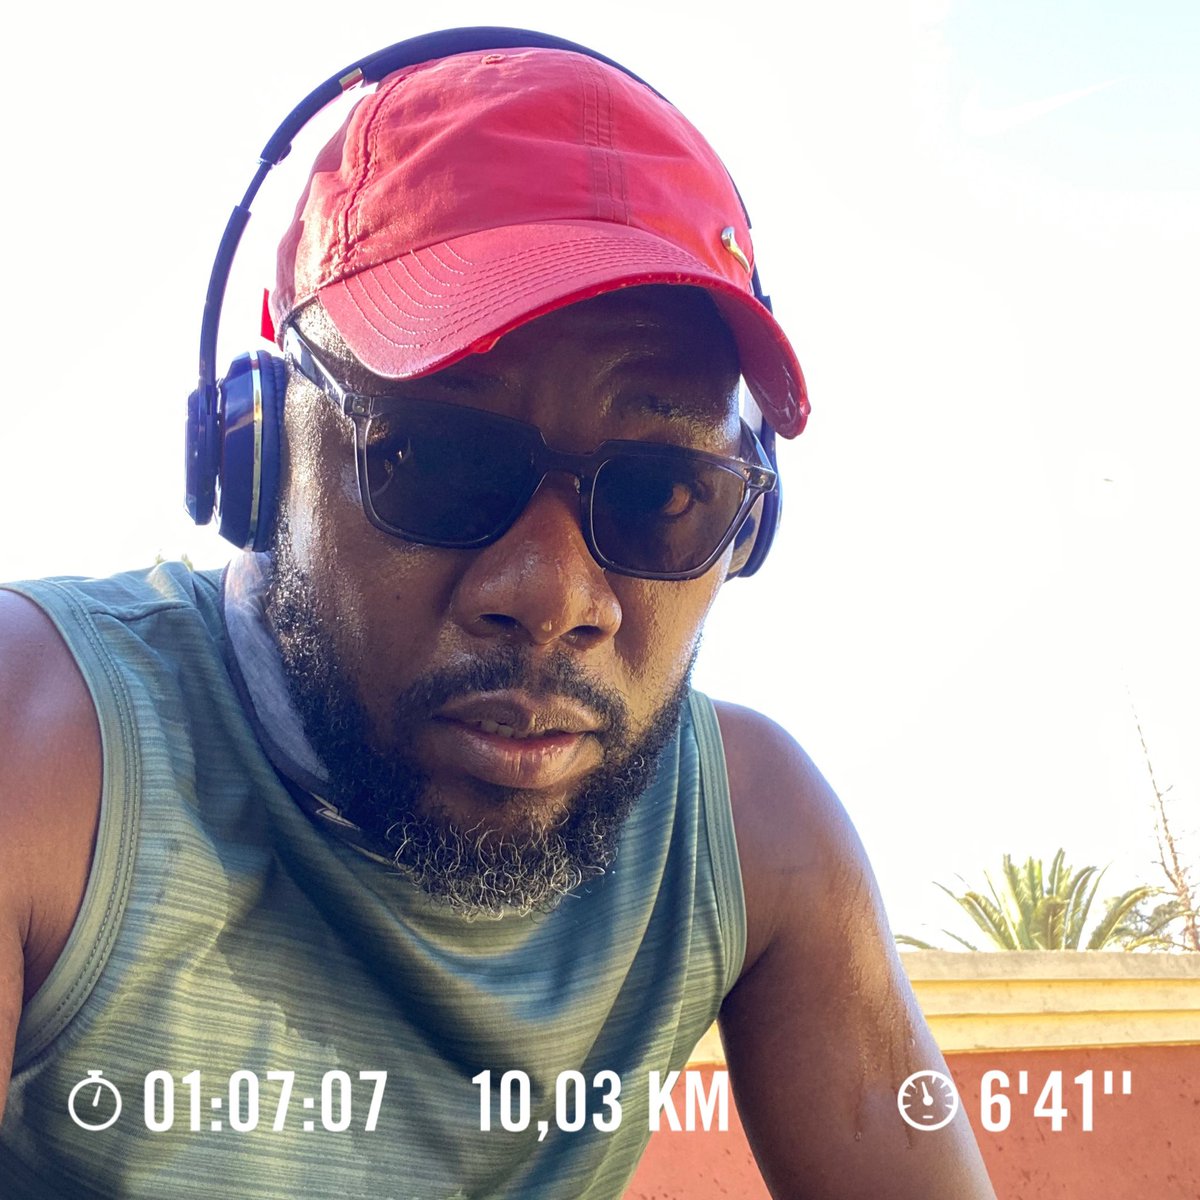 Today I did 10km in celebration of our 1976 Youth who fought and some died for our freedom. #SowetoUprising #YouthDay2022 #RunningWithTumiSole